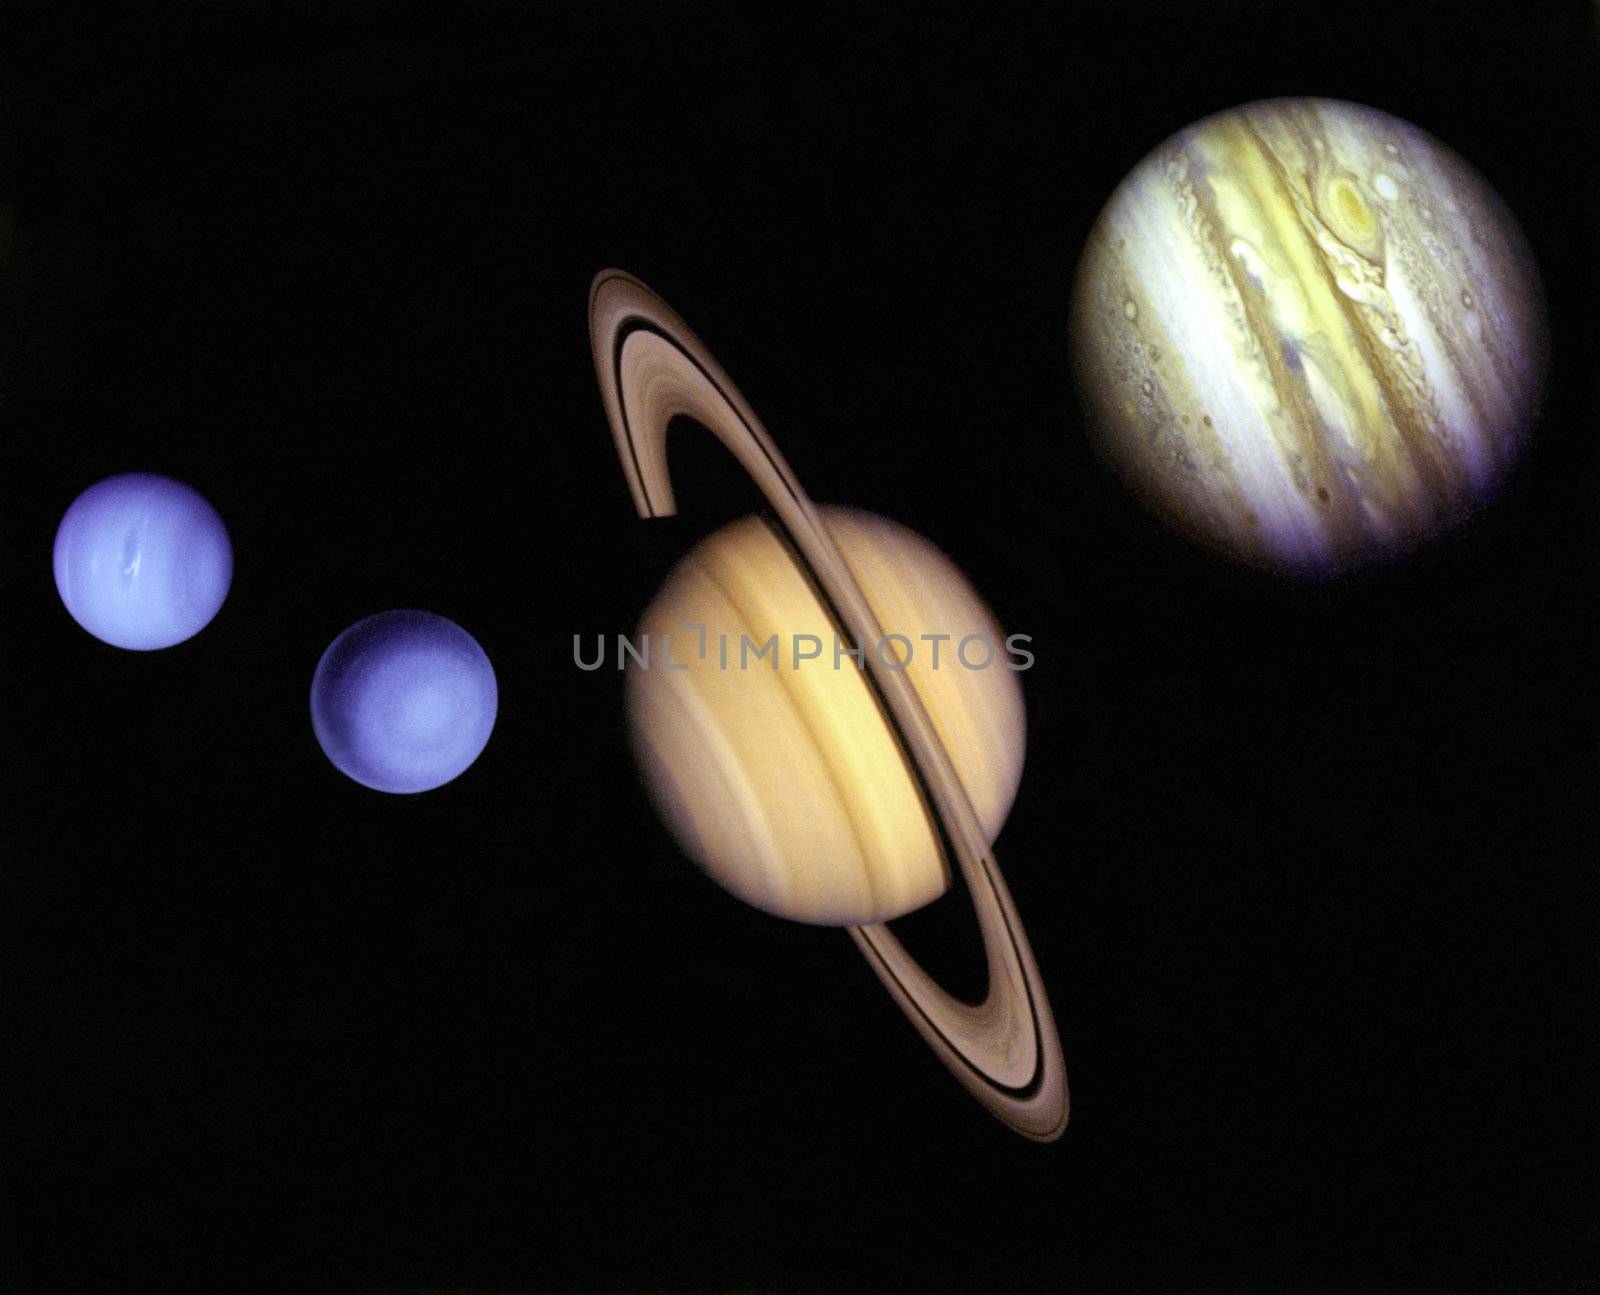 NASA image of planets in outer space.